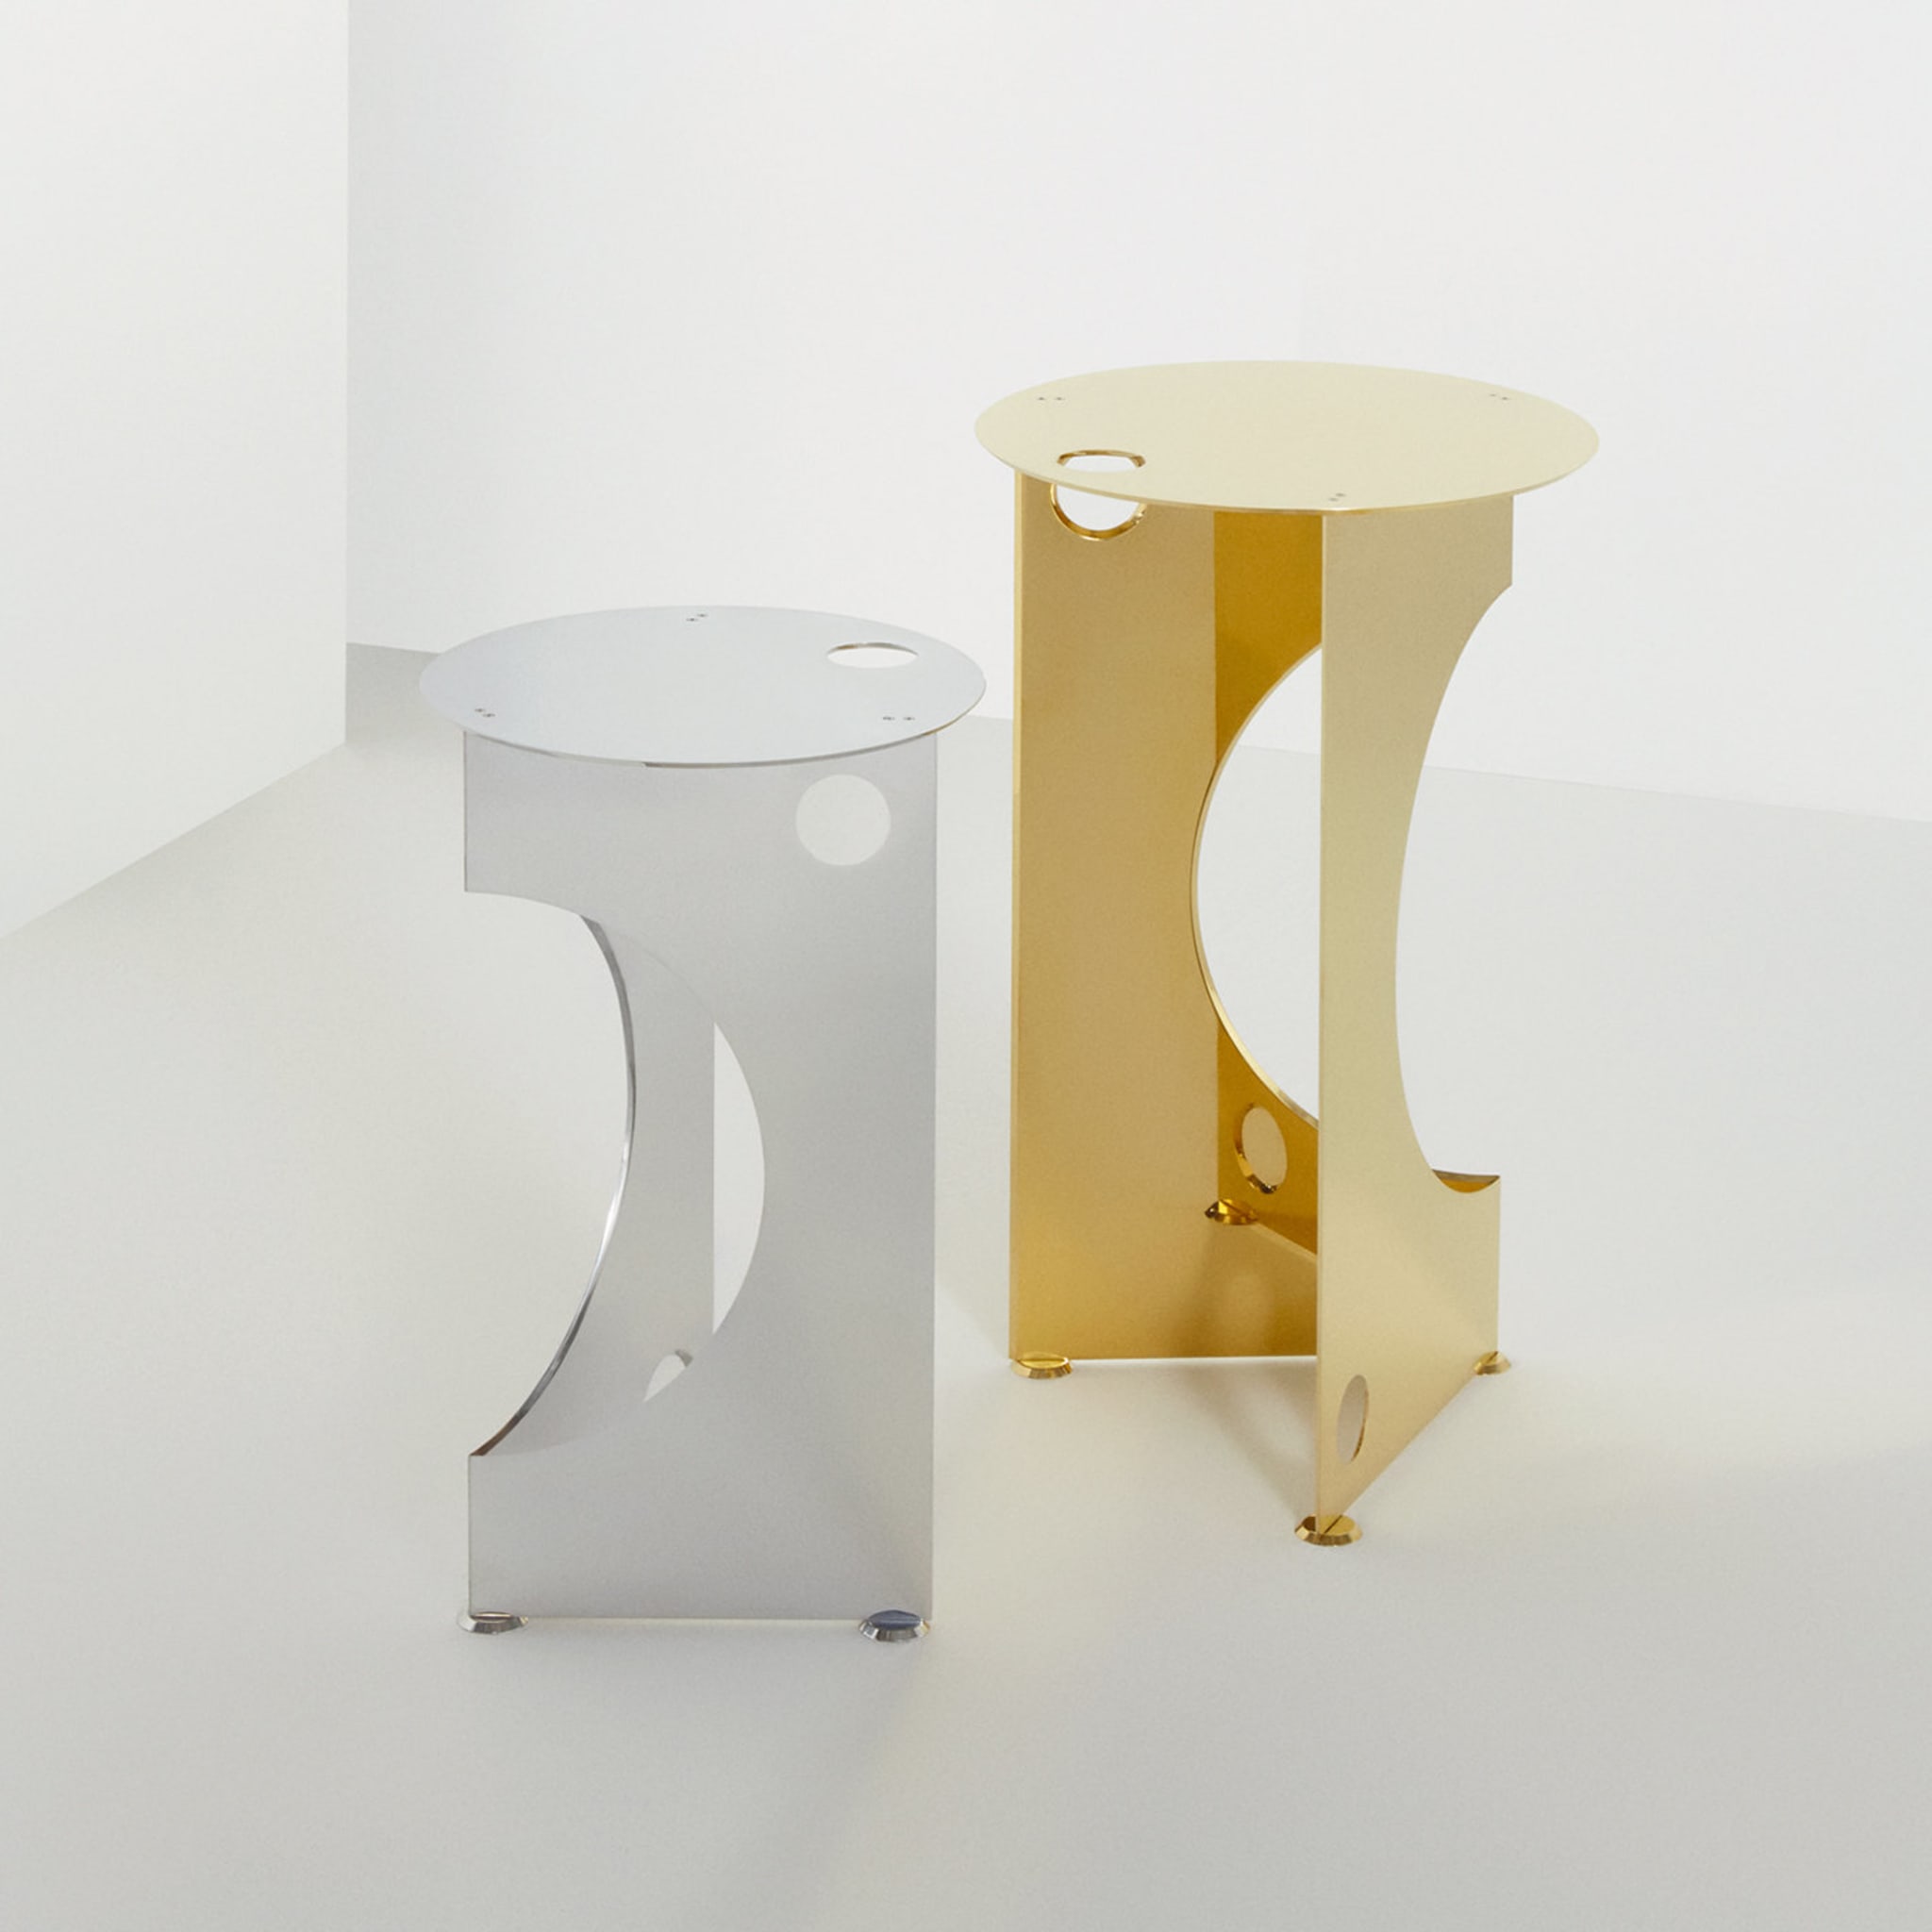 One Side Table in Polished Aluminium - Alternative view 1